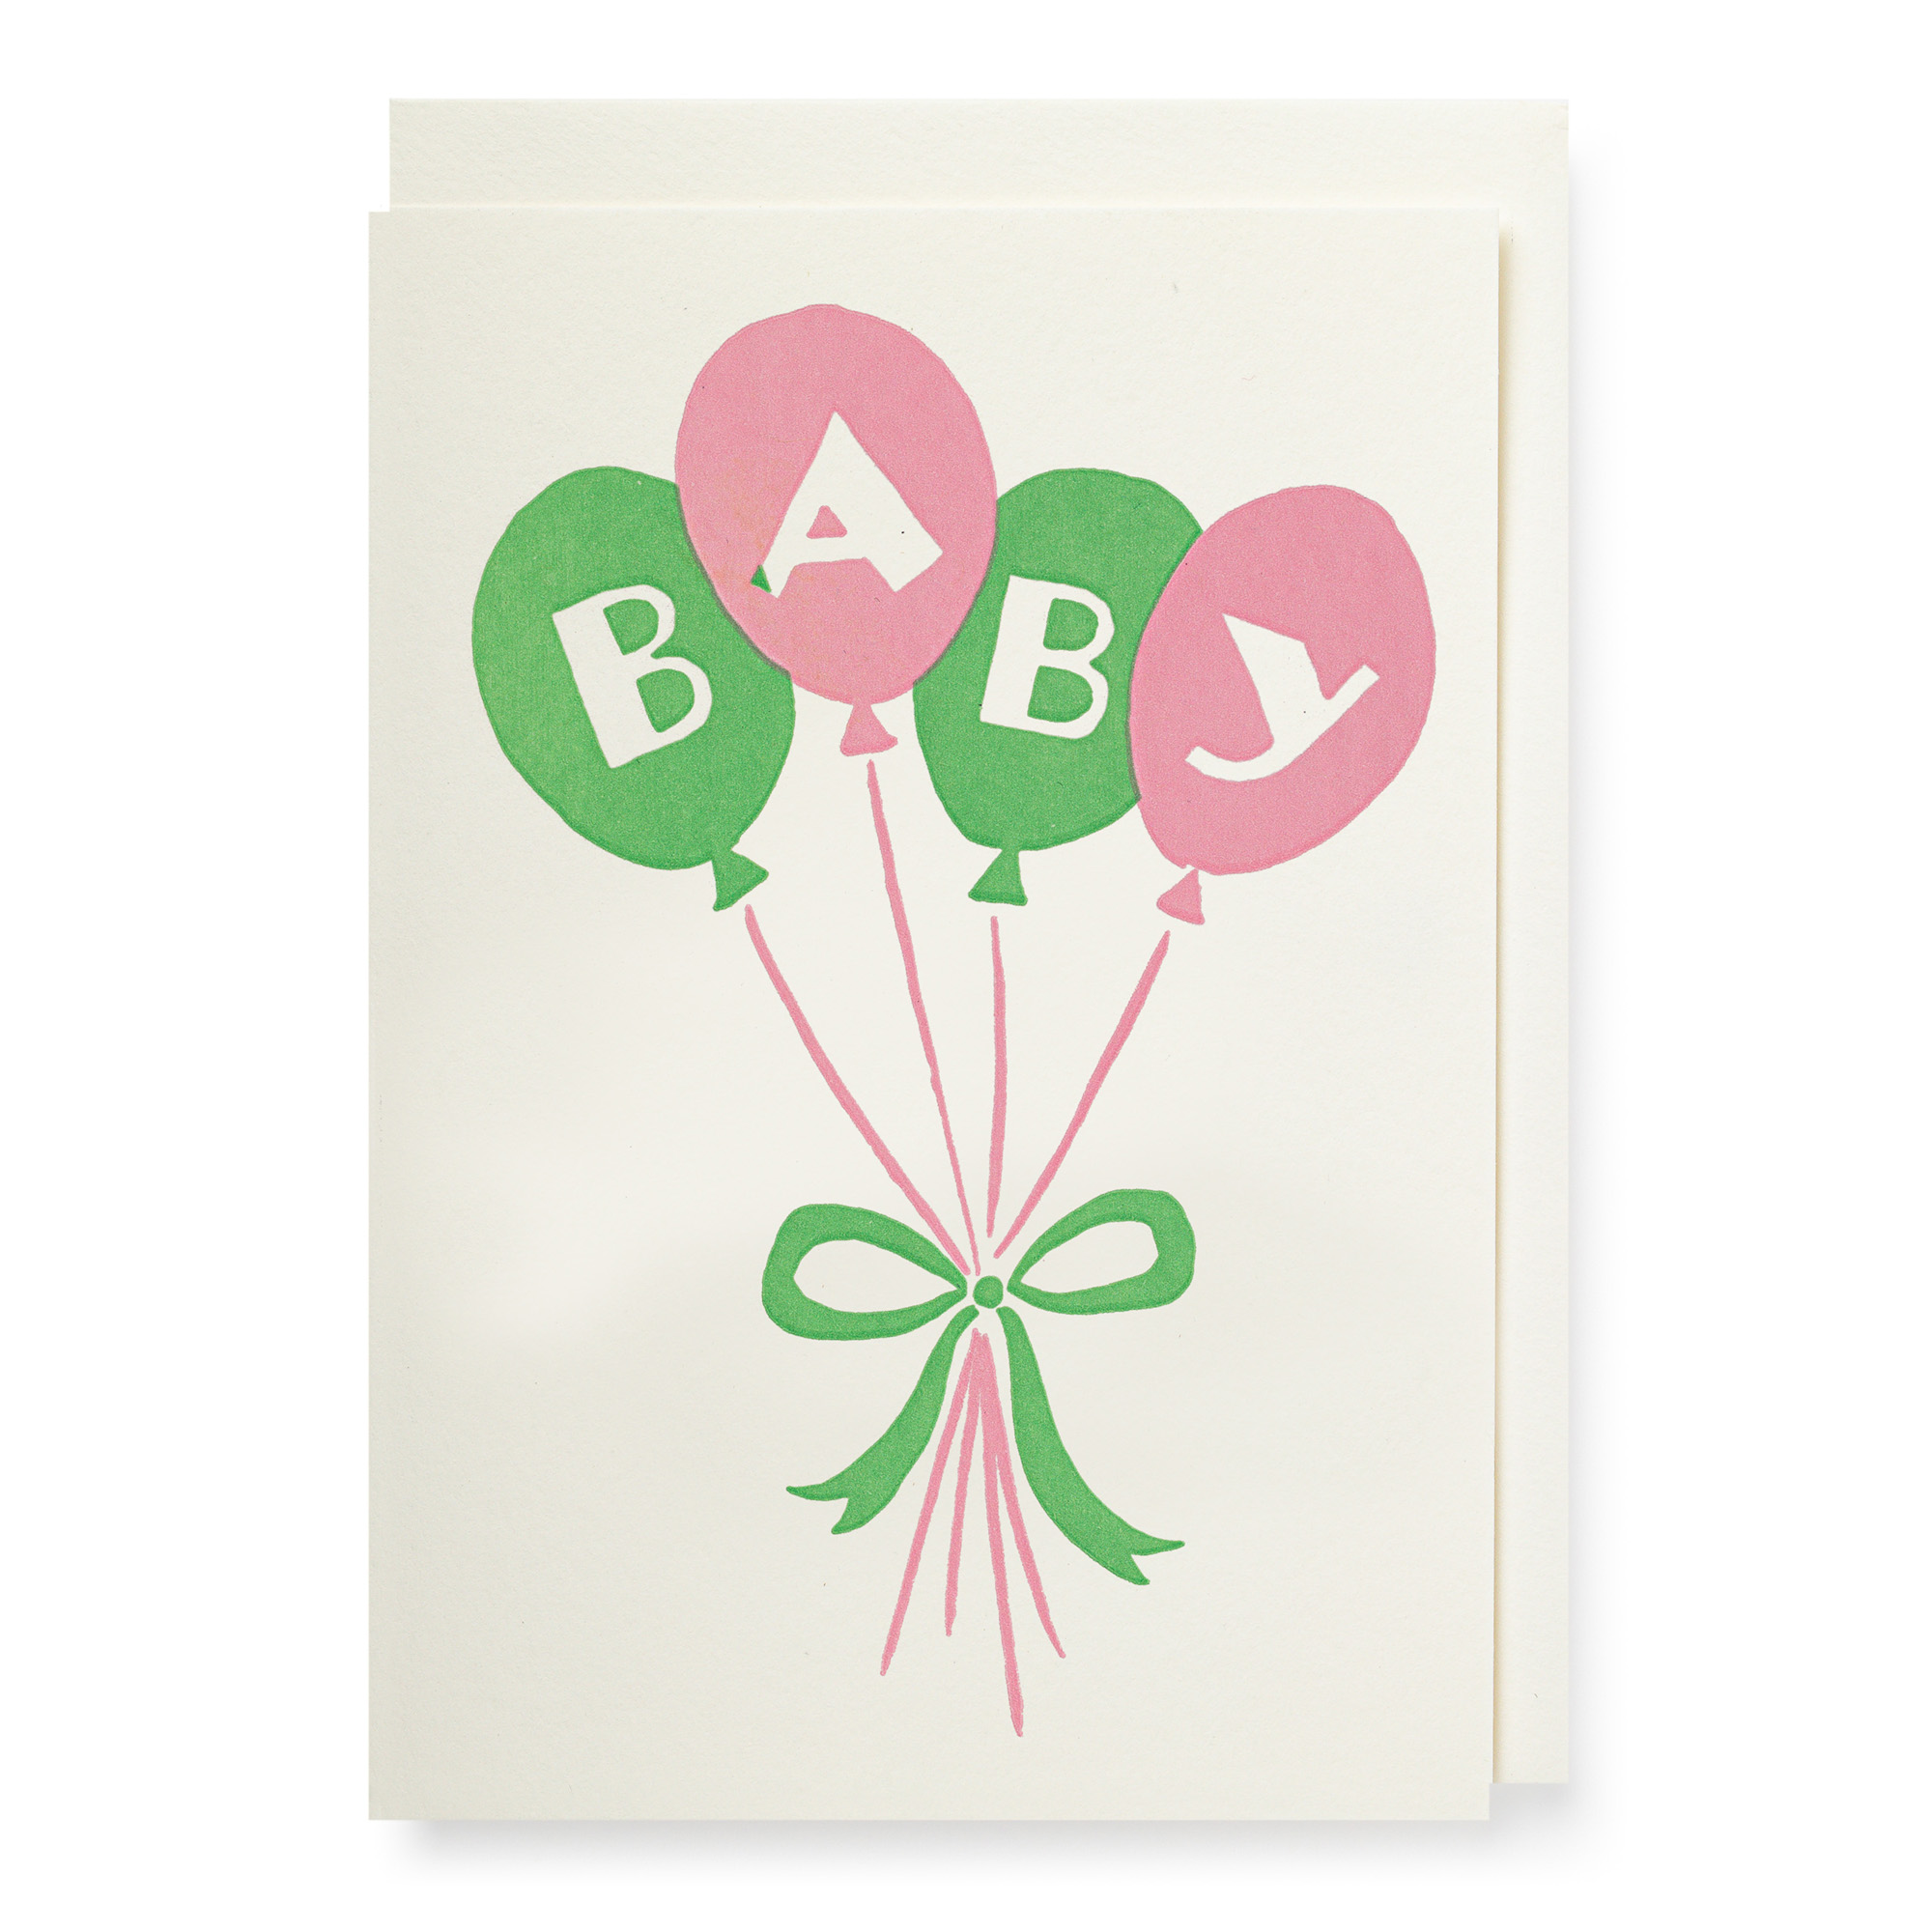 Baby Balloons - Notelets Singles - Ariana Martin - from Archivist Gallery 